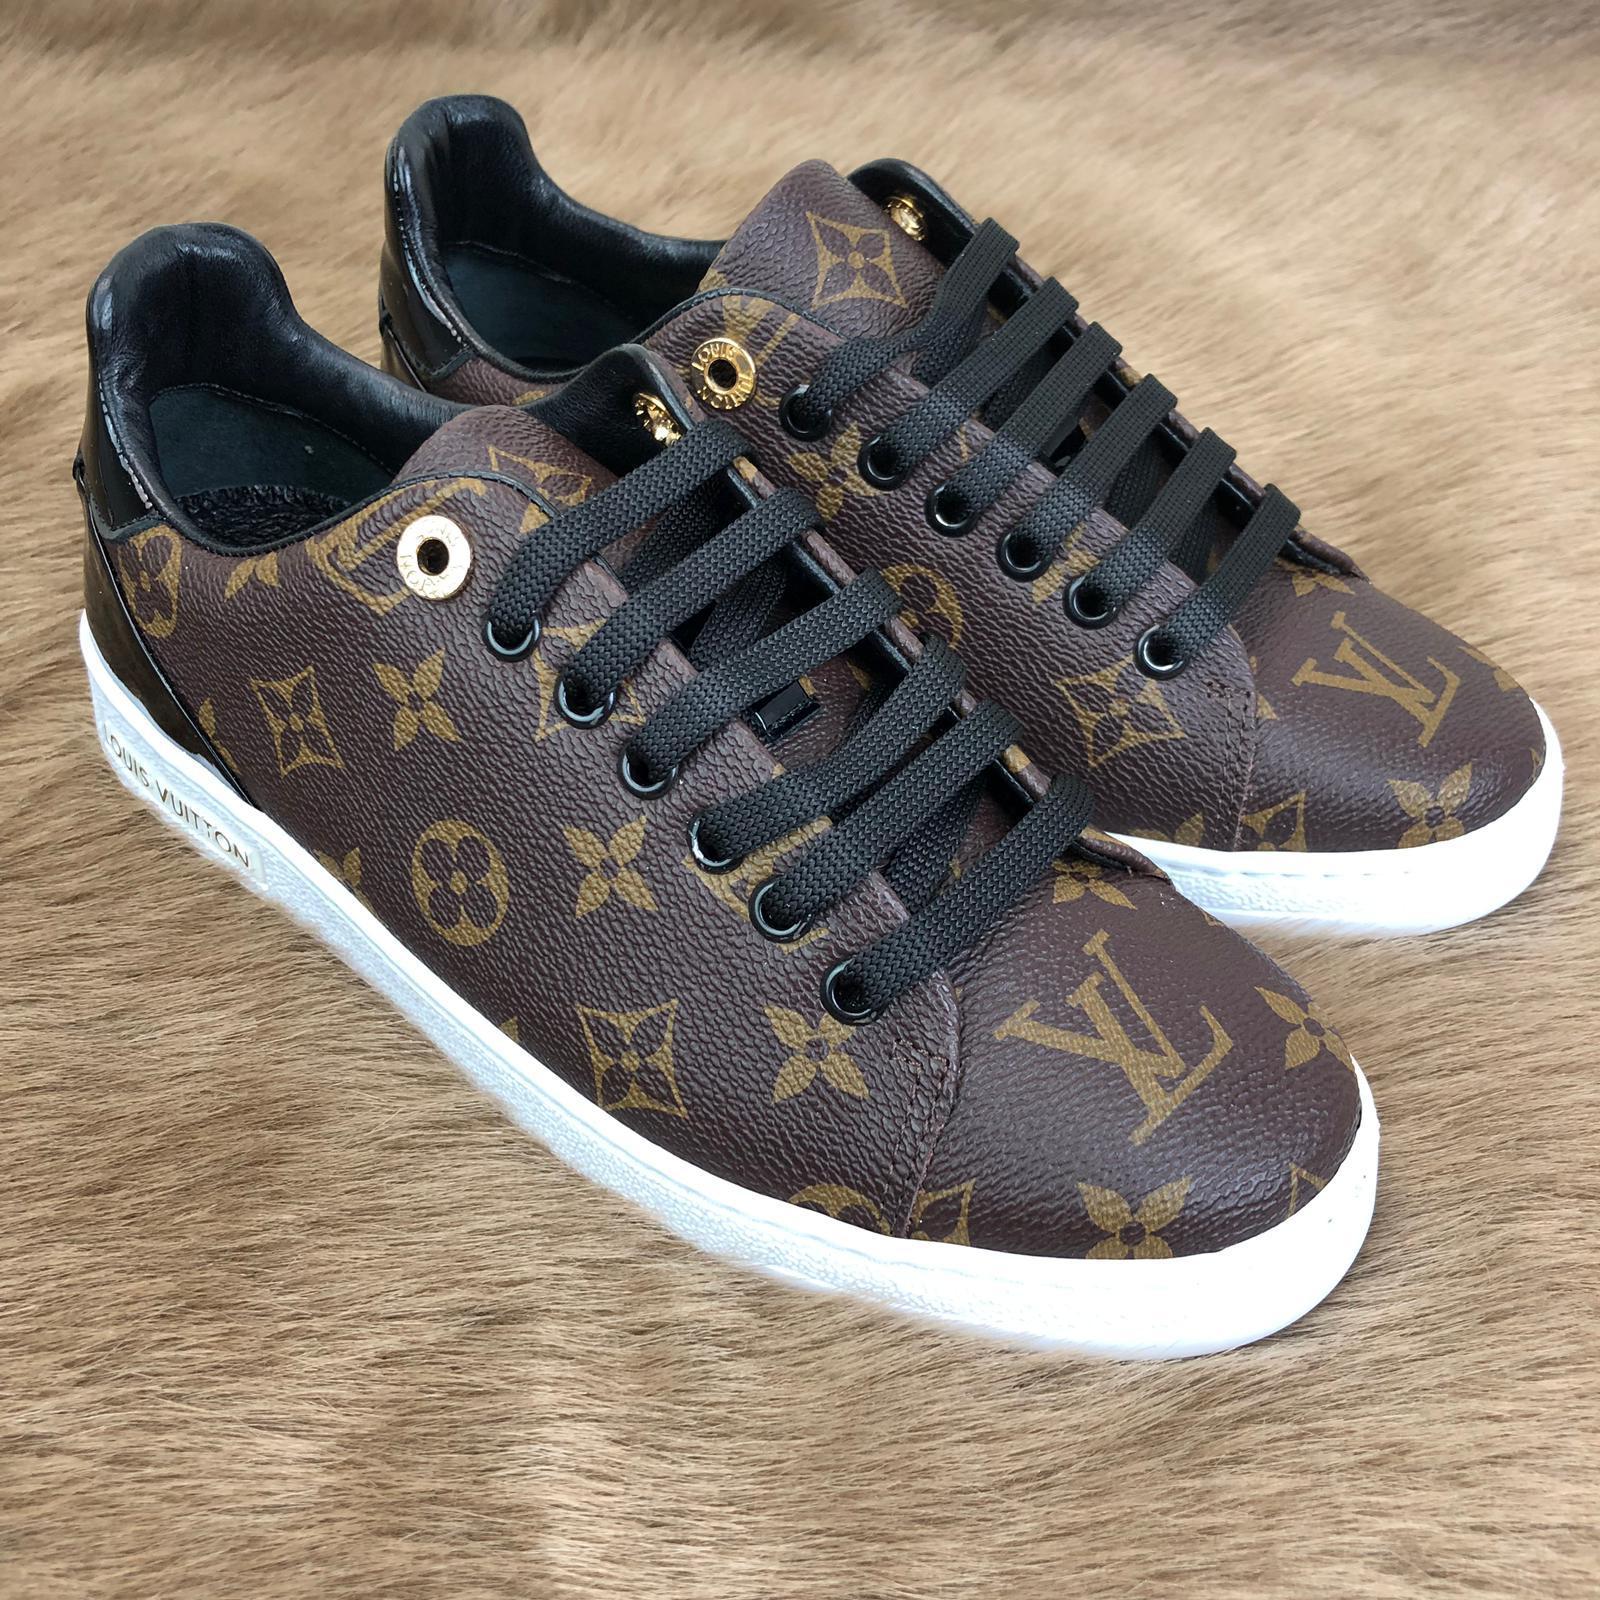 louis vuitton frontrow sneakers